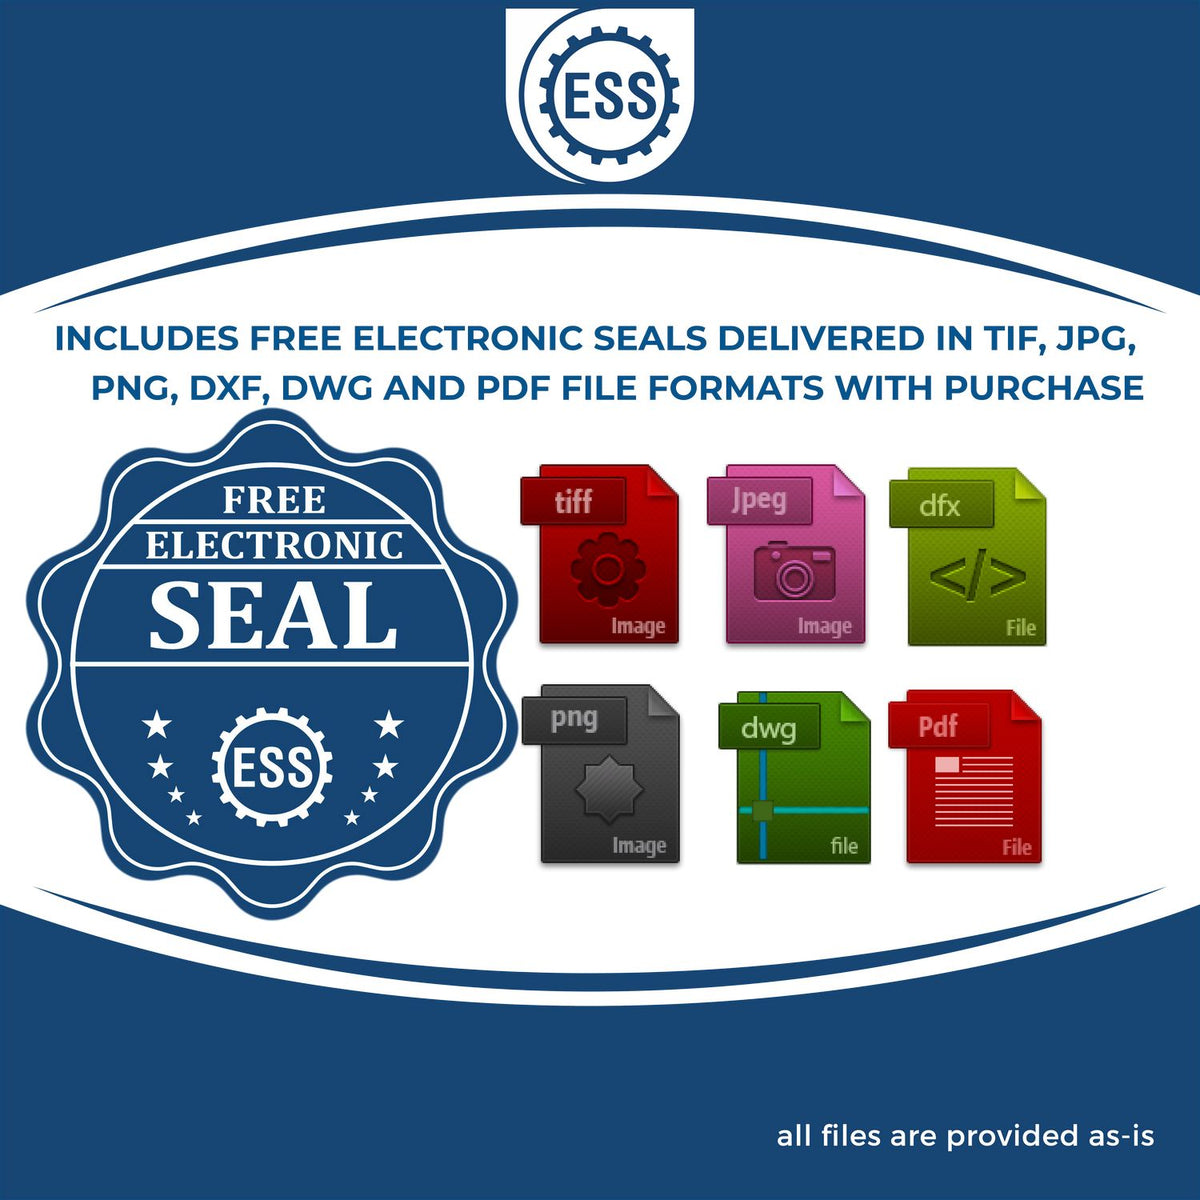 An infographic for the free electronic seal for the Self-Inking New York Geologist Stamp illustrating the different file type icons such as DXF, DWG, TIF, JPG and PNG.